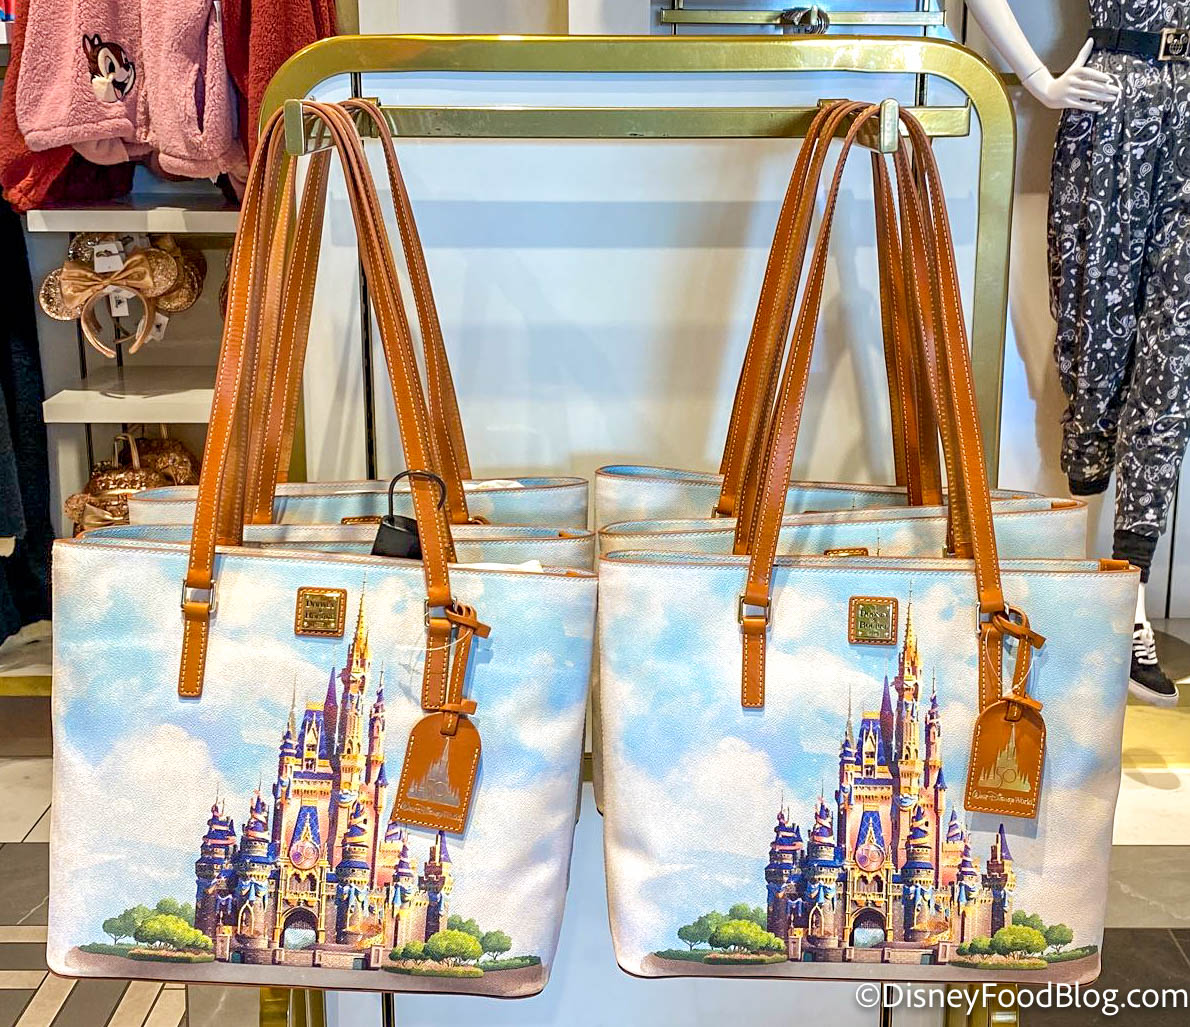 PHOTOS: Disney World Just Dropped A New 50th Anniversary Dooney & Bourke  Bag — And it's EPIC